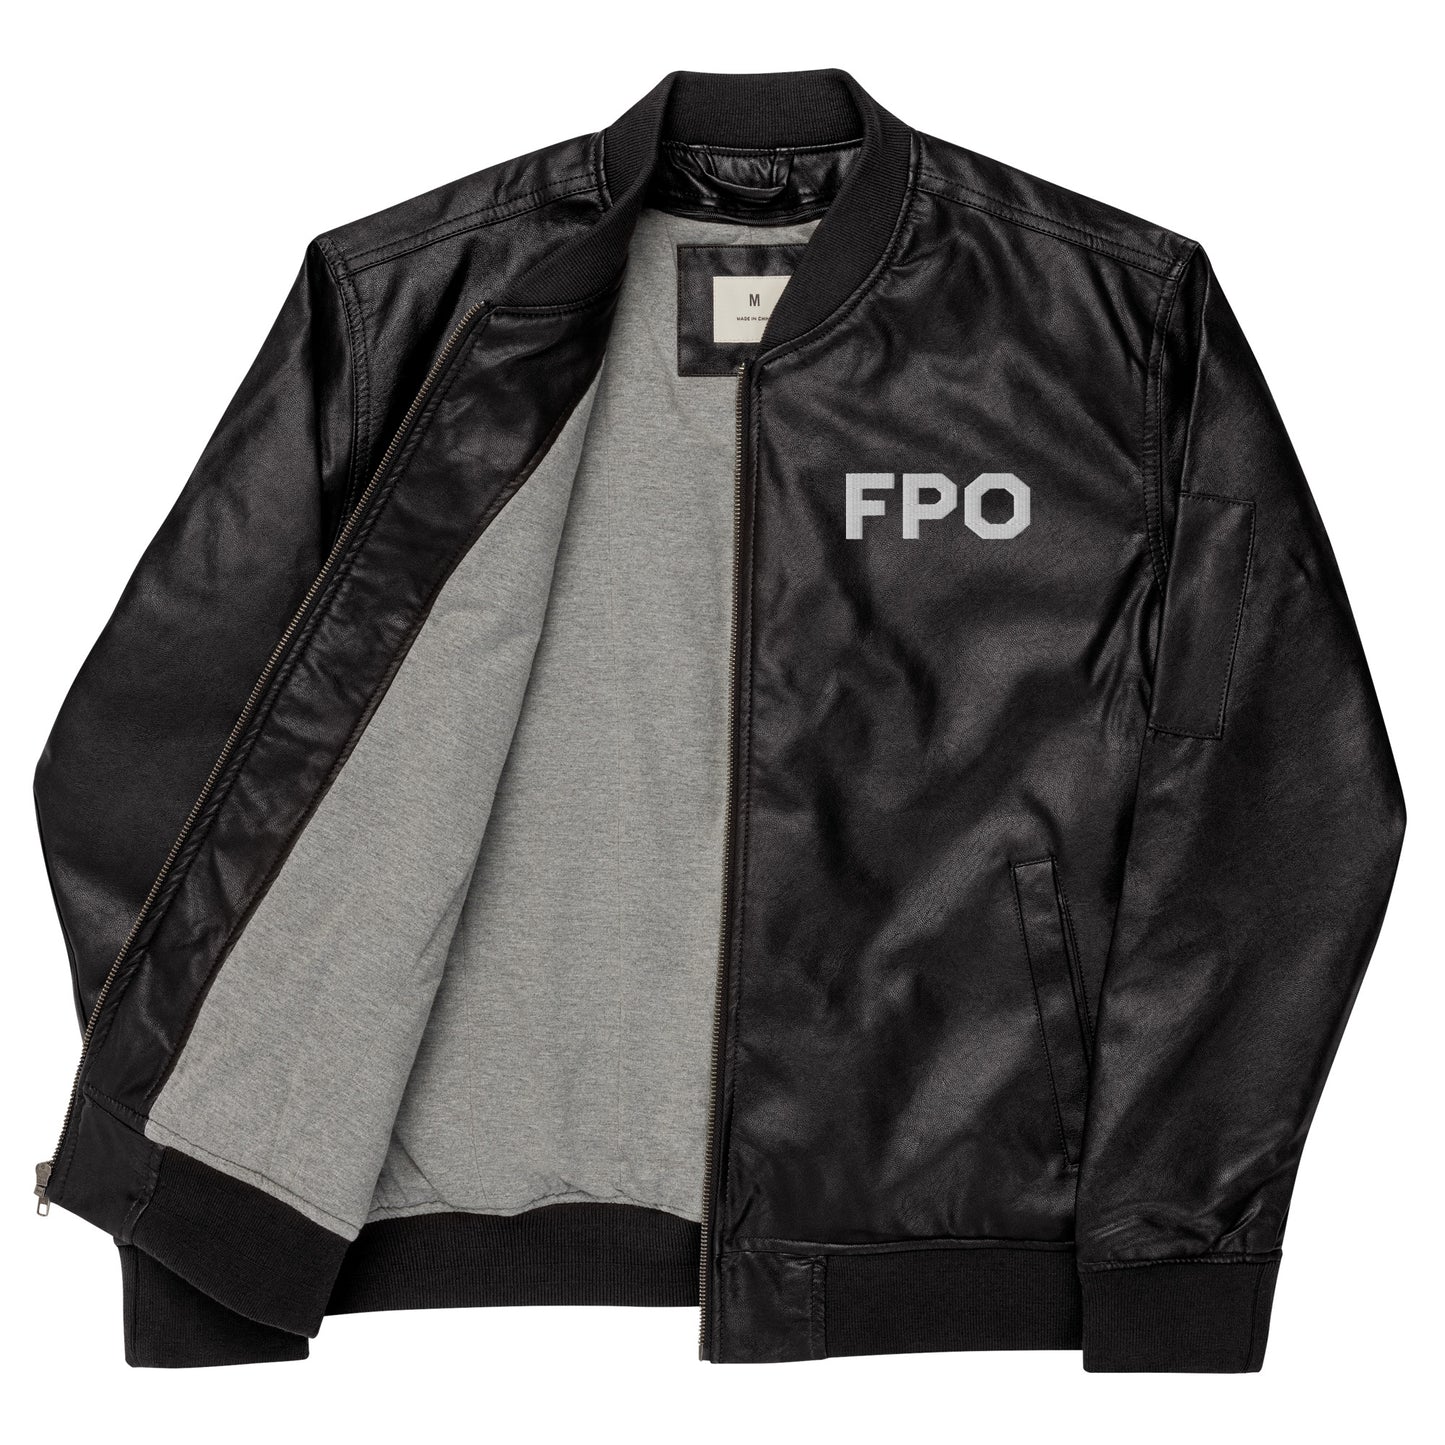 FPO Embroidered Faux Leather Bomber Jacket